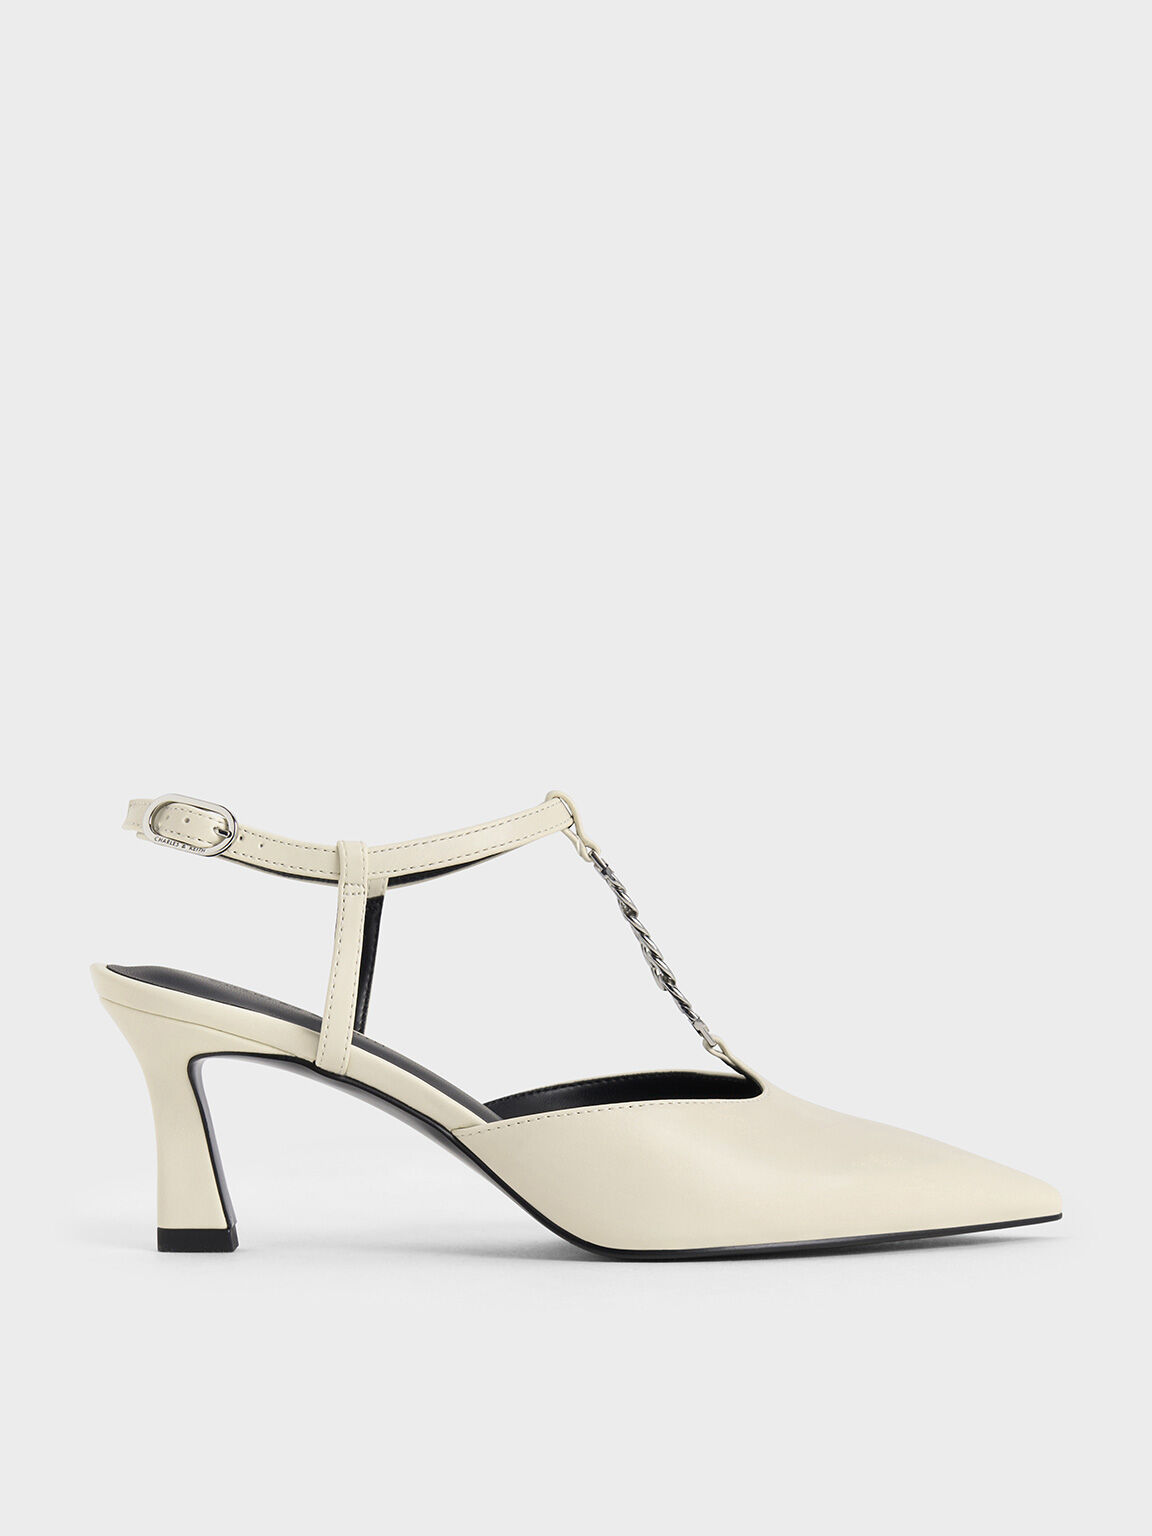 T-Bar Chain-Link Pointed-Toe Pumps, Chalk, hi-res